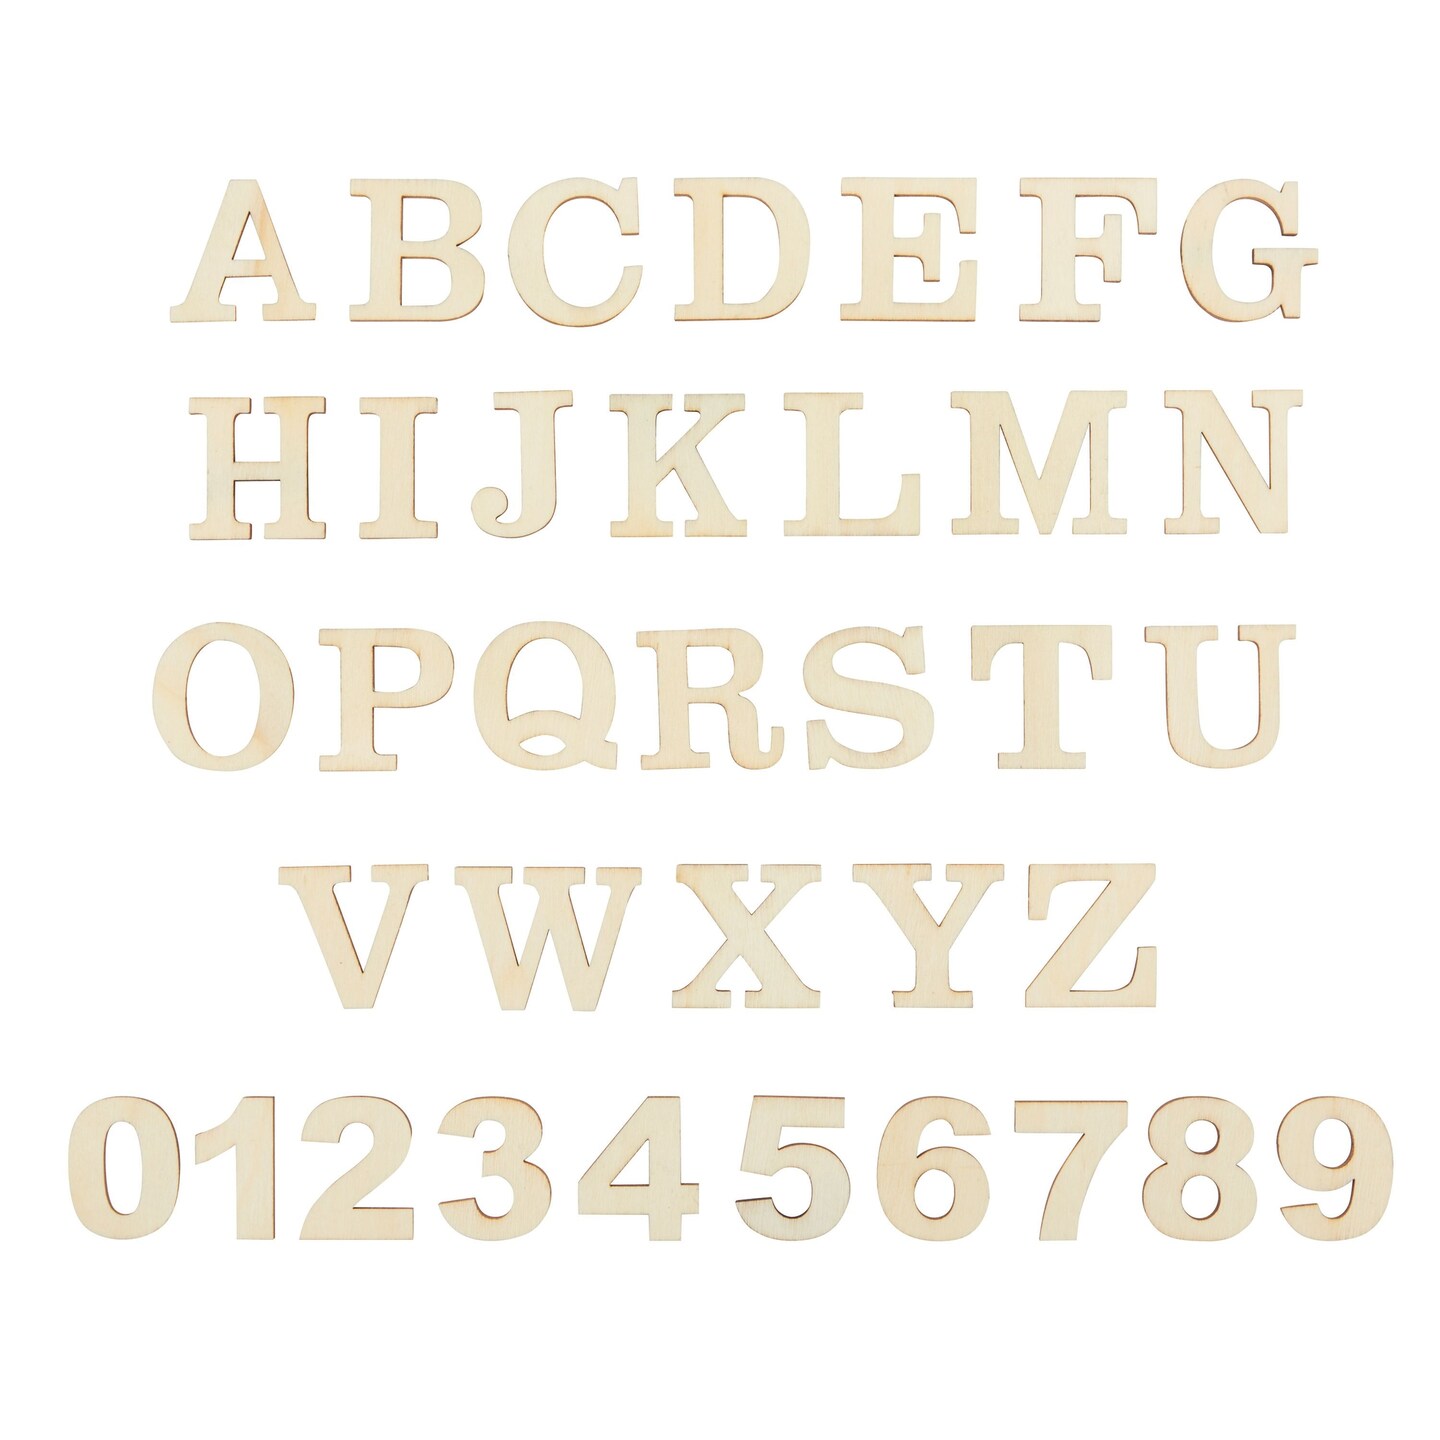 144 Piece 1.1-Inch Wooden Alphabet Letters and Numbers for DIY Crafts (A-Z, 0-9, 4 Sets)